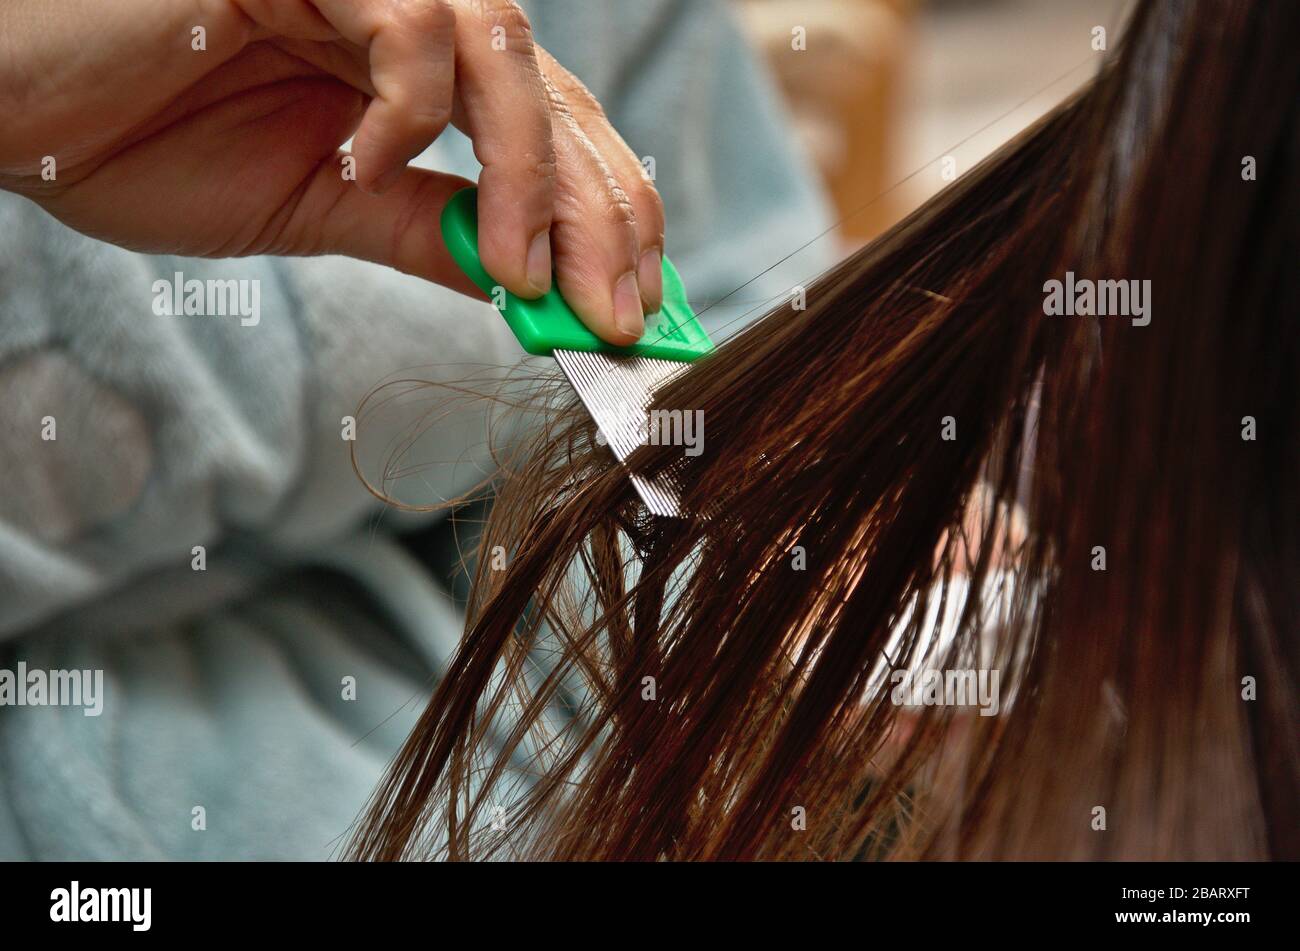 Head lice and nits treatment using a detection comb to find and remove nits. Stock Photo